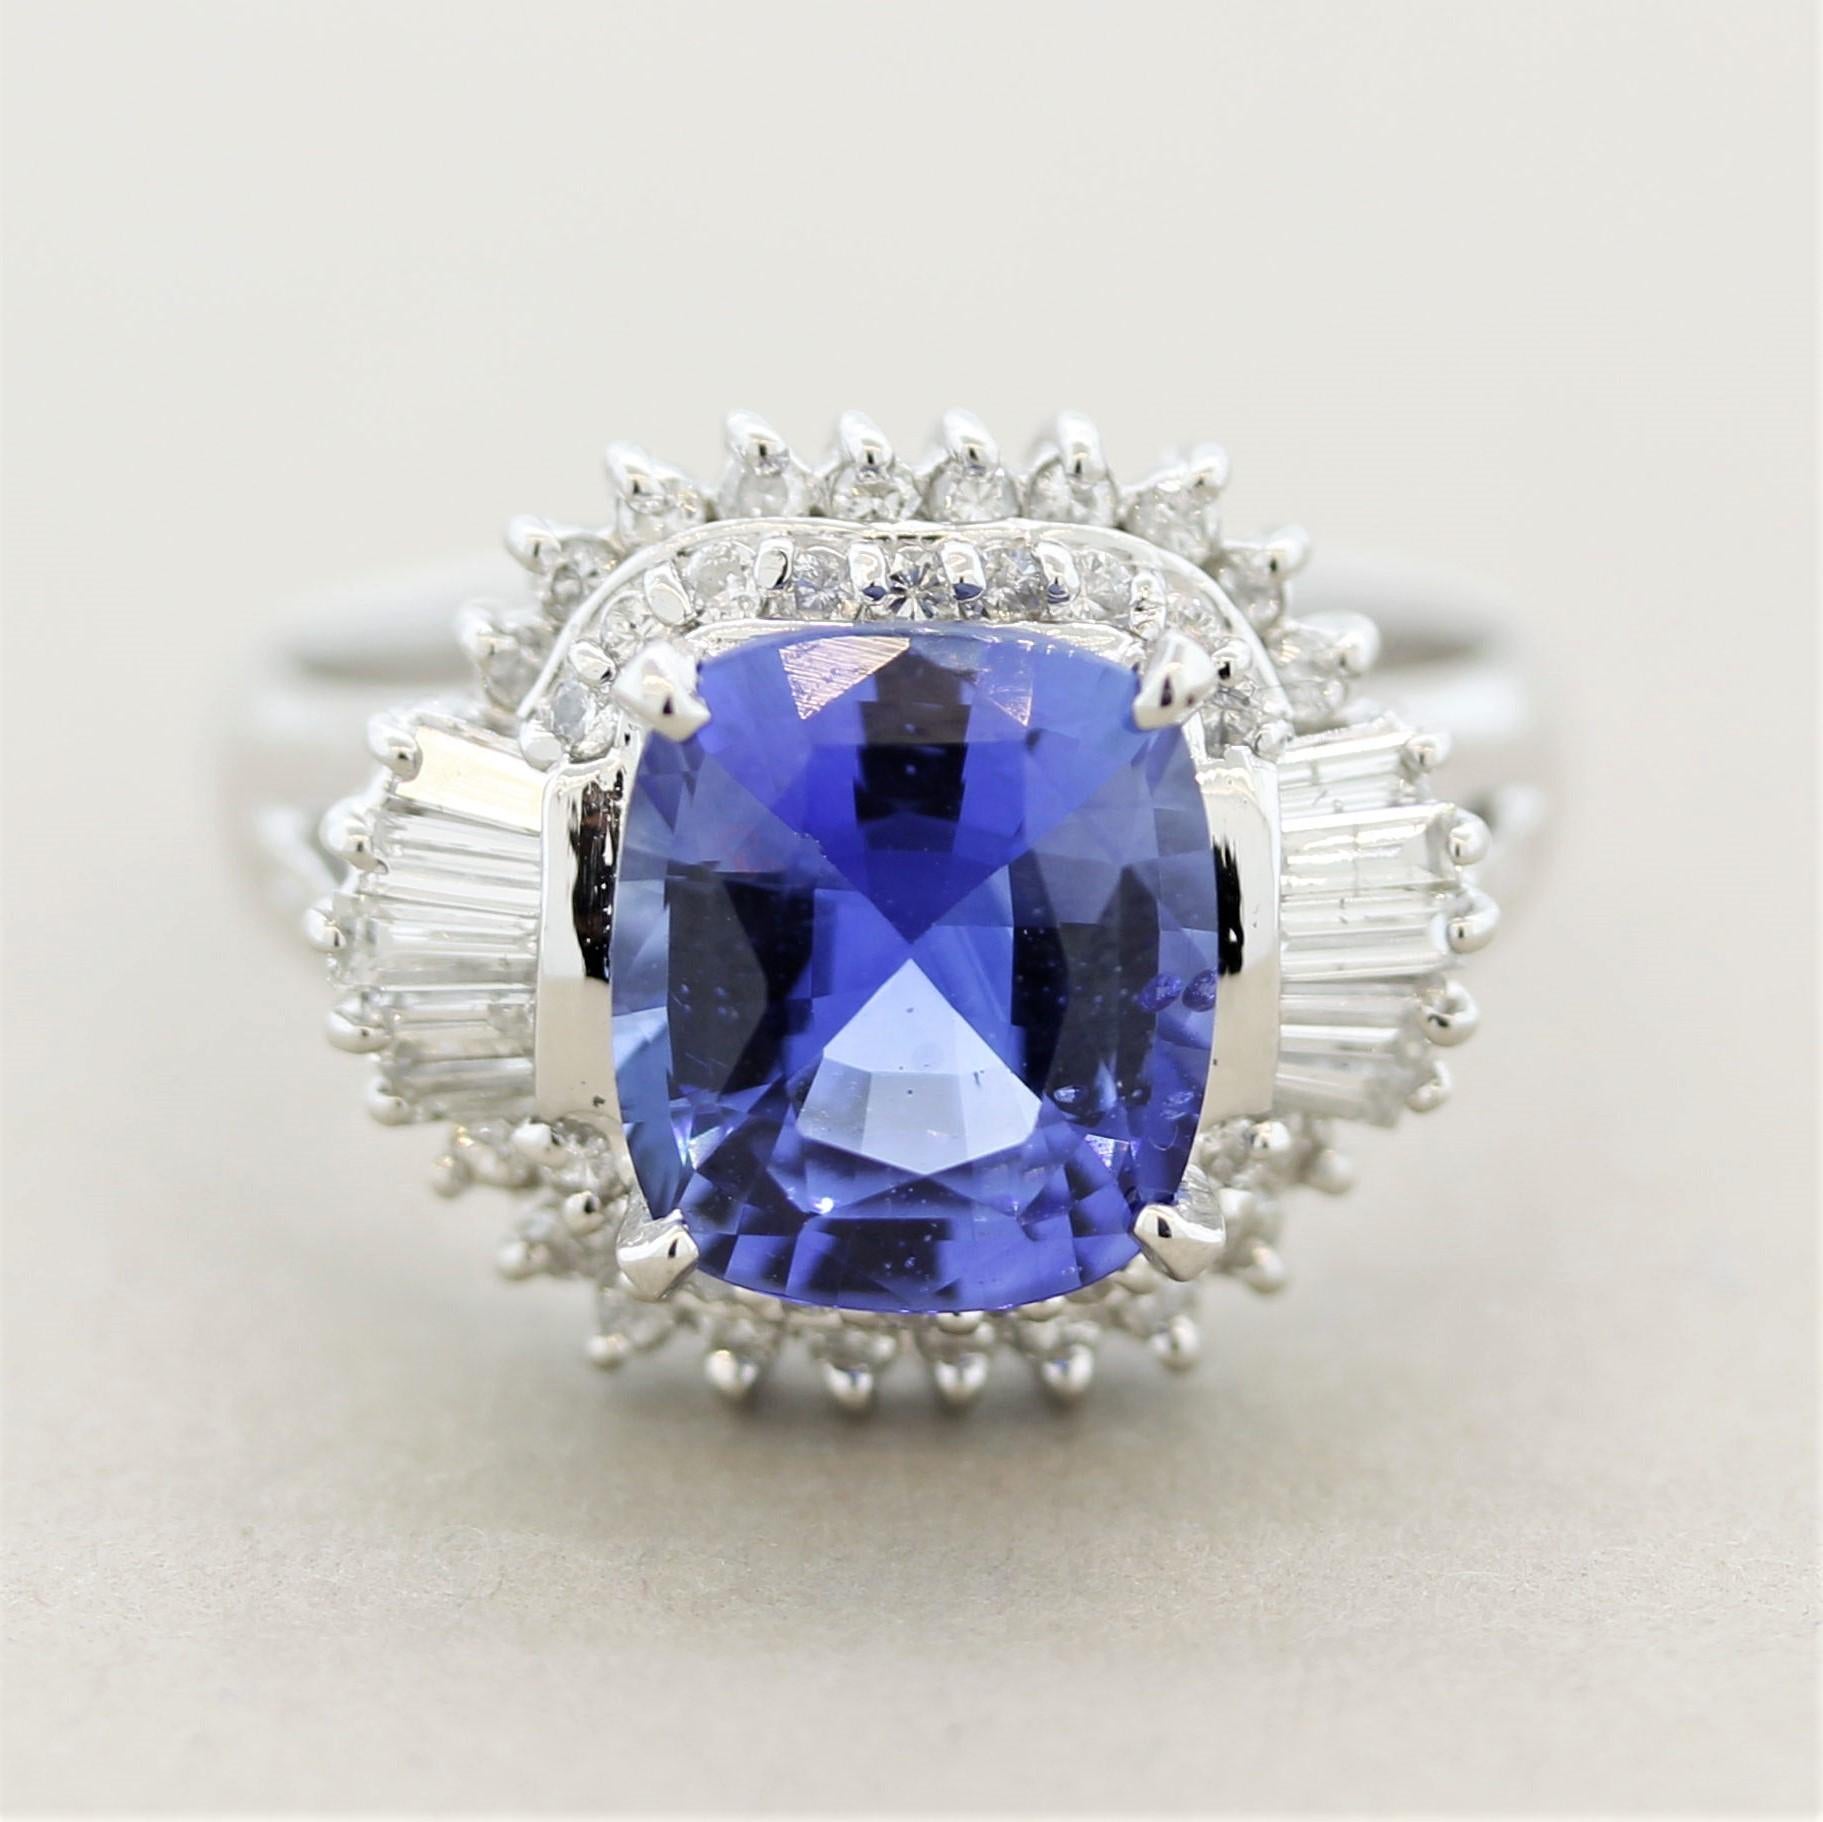 A simple yet fine and elegant gemstone ring. It features a fine sapphire just under 3 carats (2.96ct) which has a rich vivid blue color and is free from any inclusions allowing for the stones natural brightness to shine. It is accented by 0.50